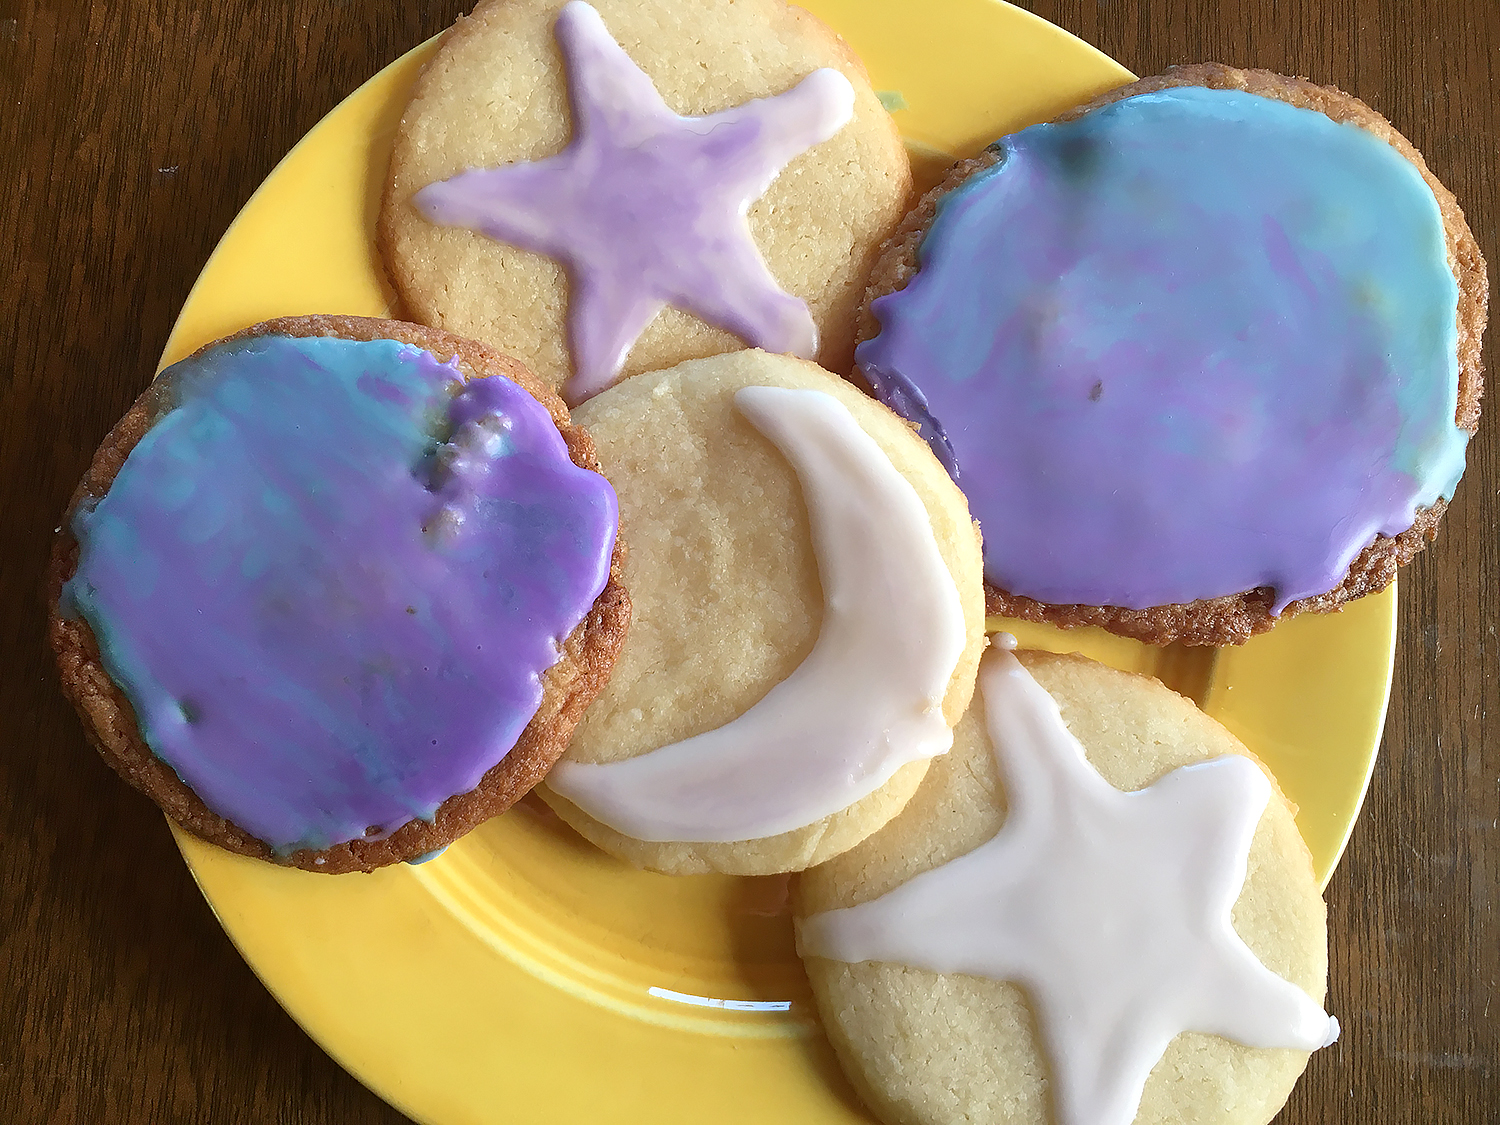 Cookies decorated to look like planets, stars and moons